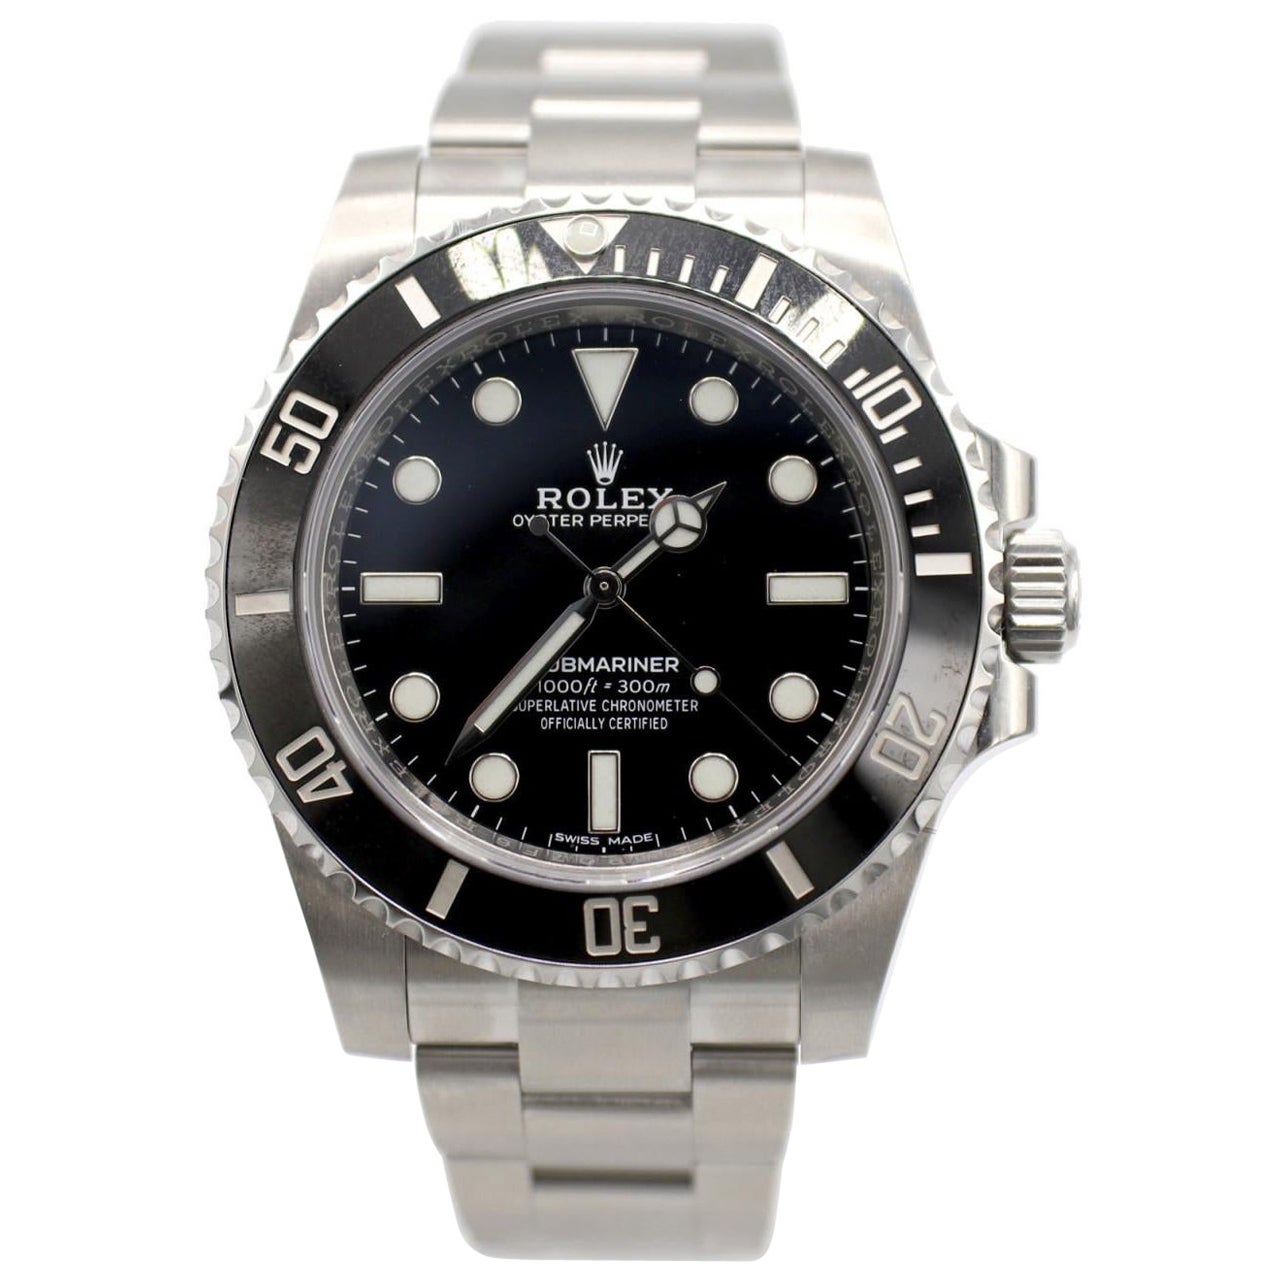 Montre Rolex Submariner Stainless Steel No Date Reference 114060 en vente